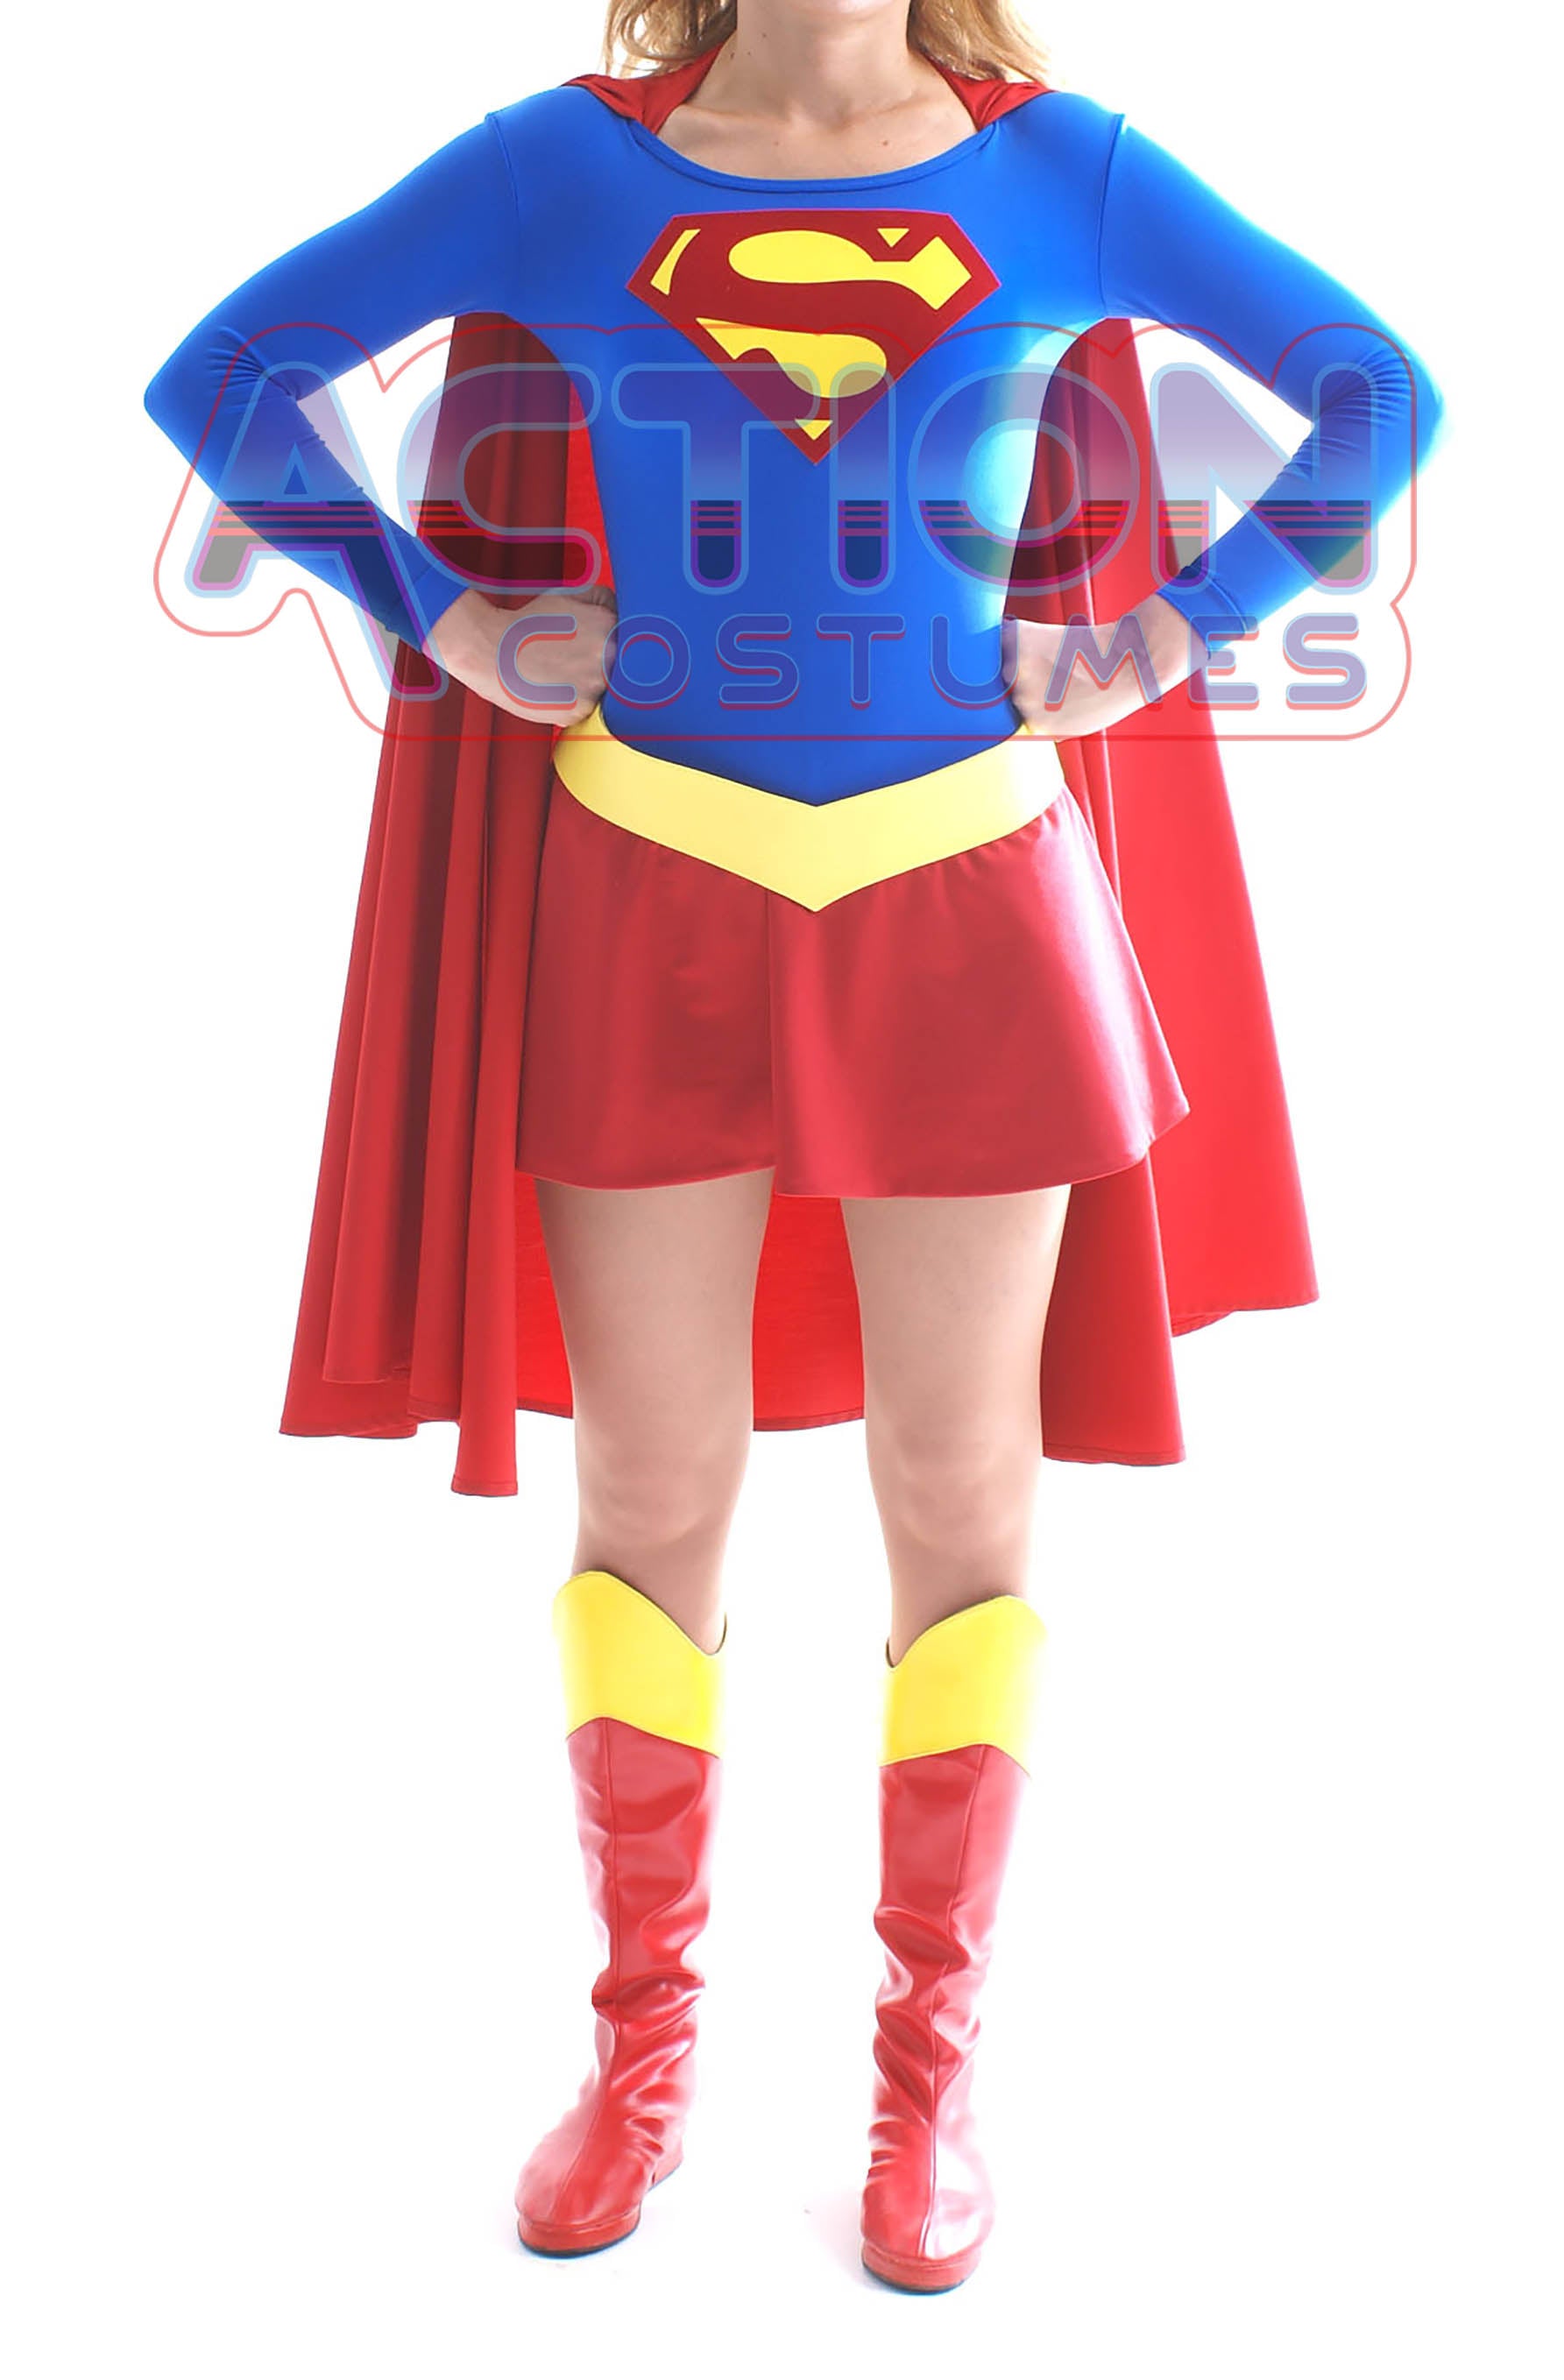 supergirl-costume-80s-style